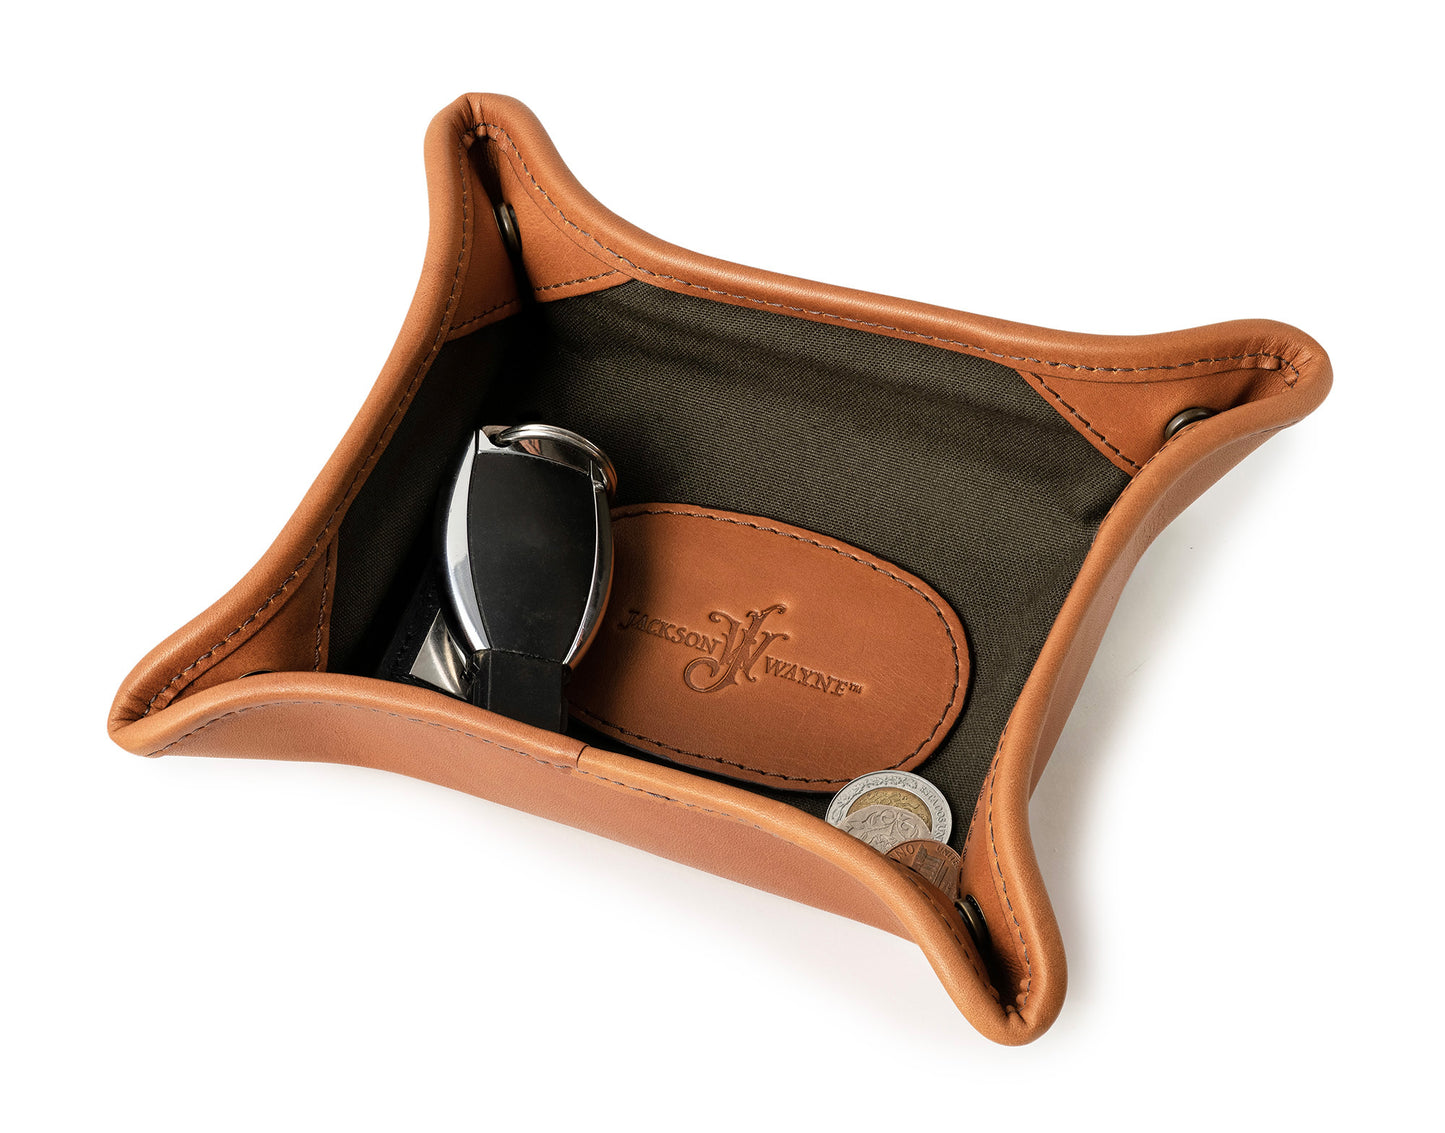 full grain leather valet tray by Jackson Wayne in saddle tan leather with keys change